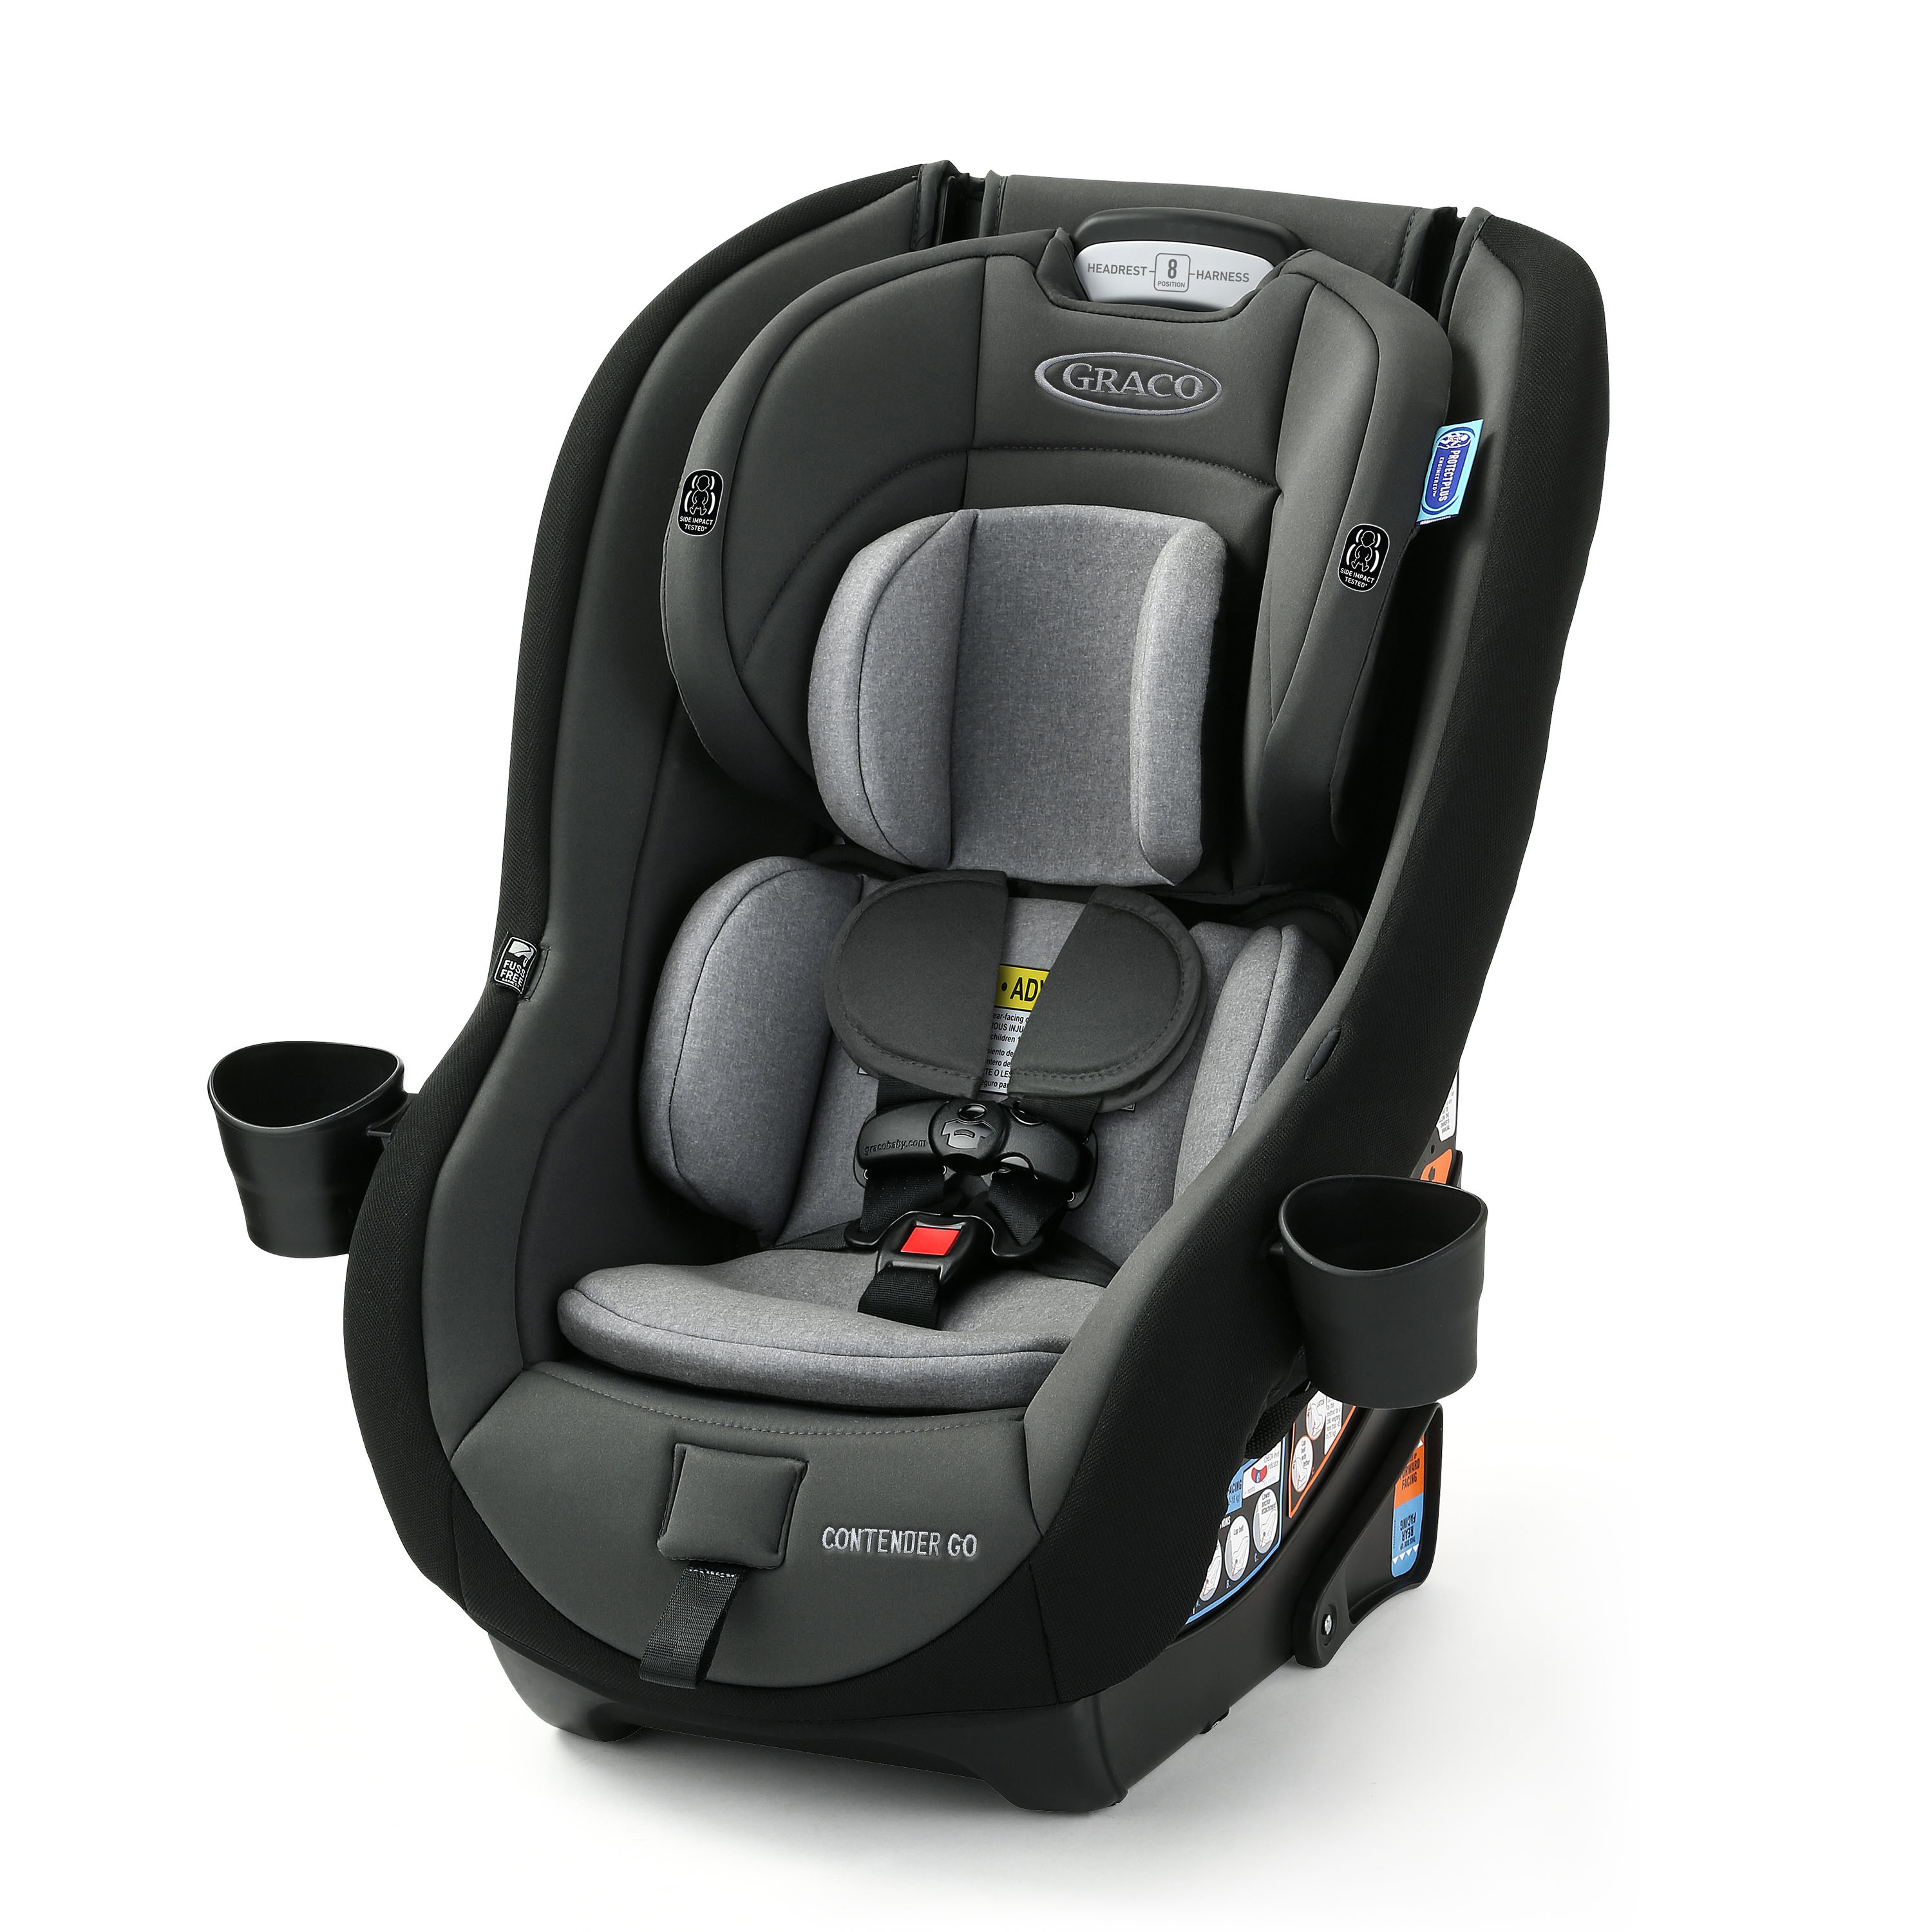 Graco Contender Go Convertible Car Seat, Winston - image 1 of 7